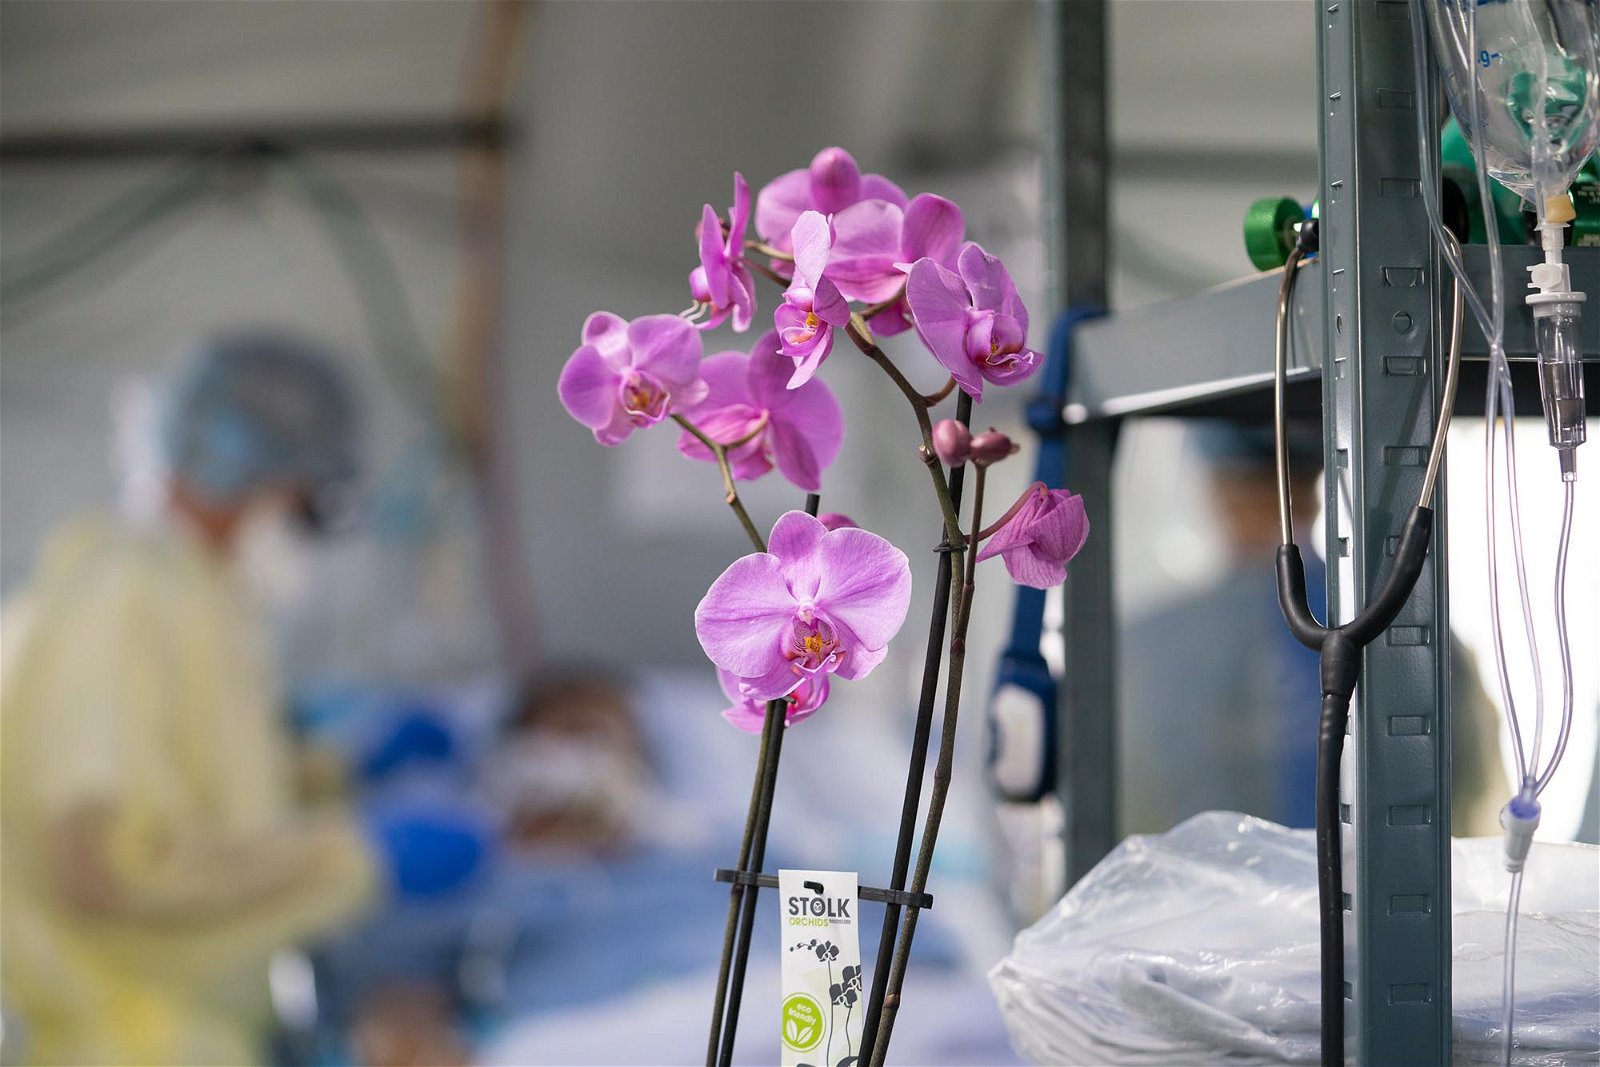 Donated flowers brightened spirits in the ICU in Cremona during Easter week.